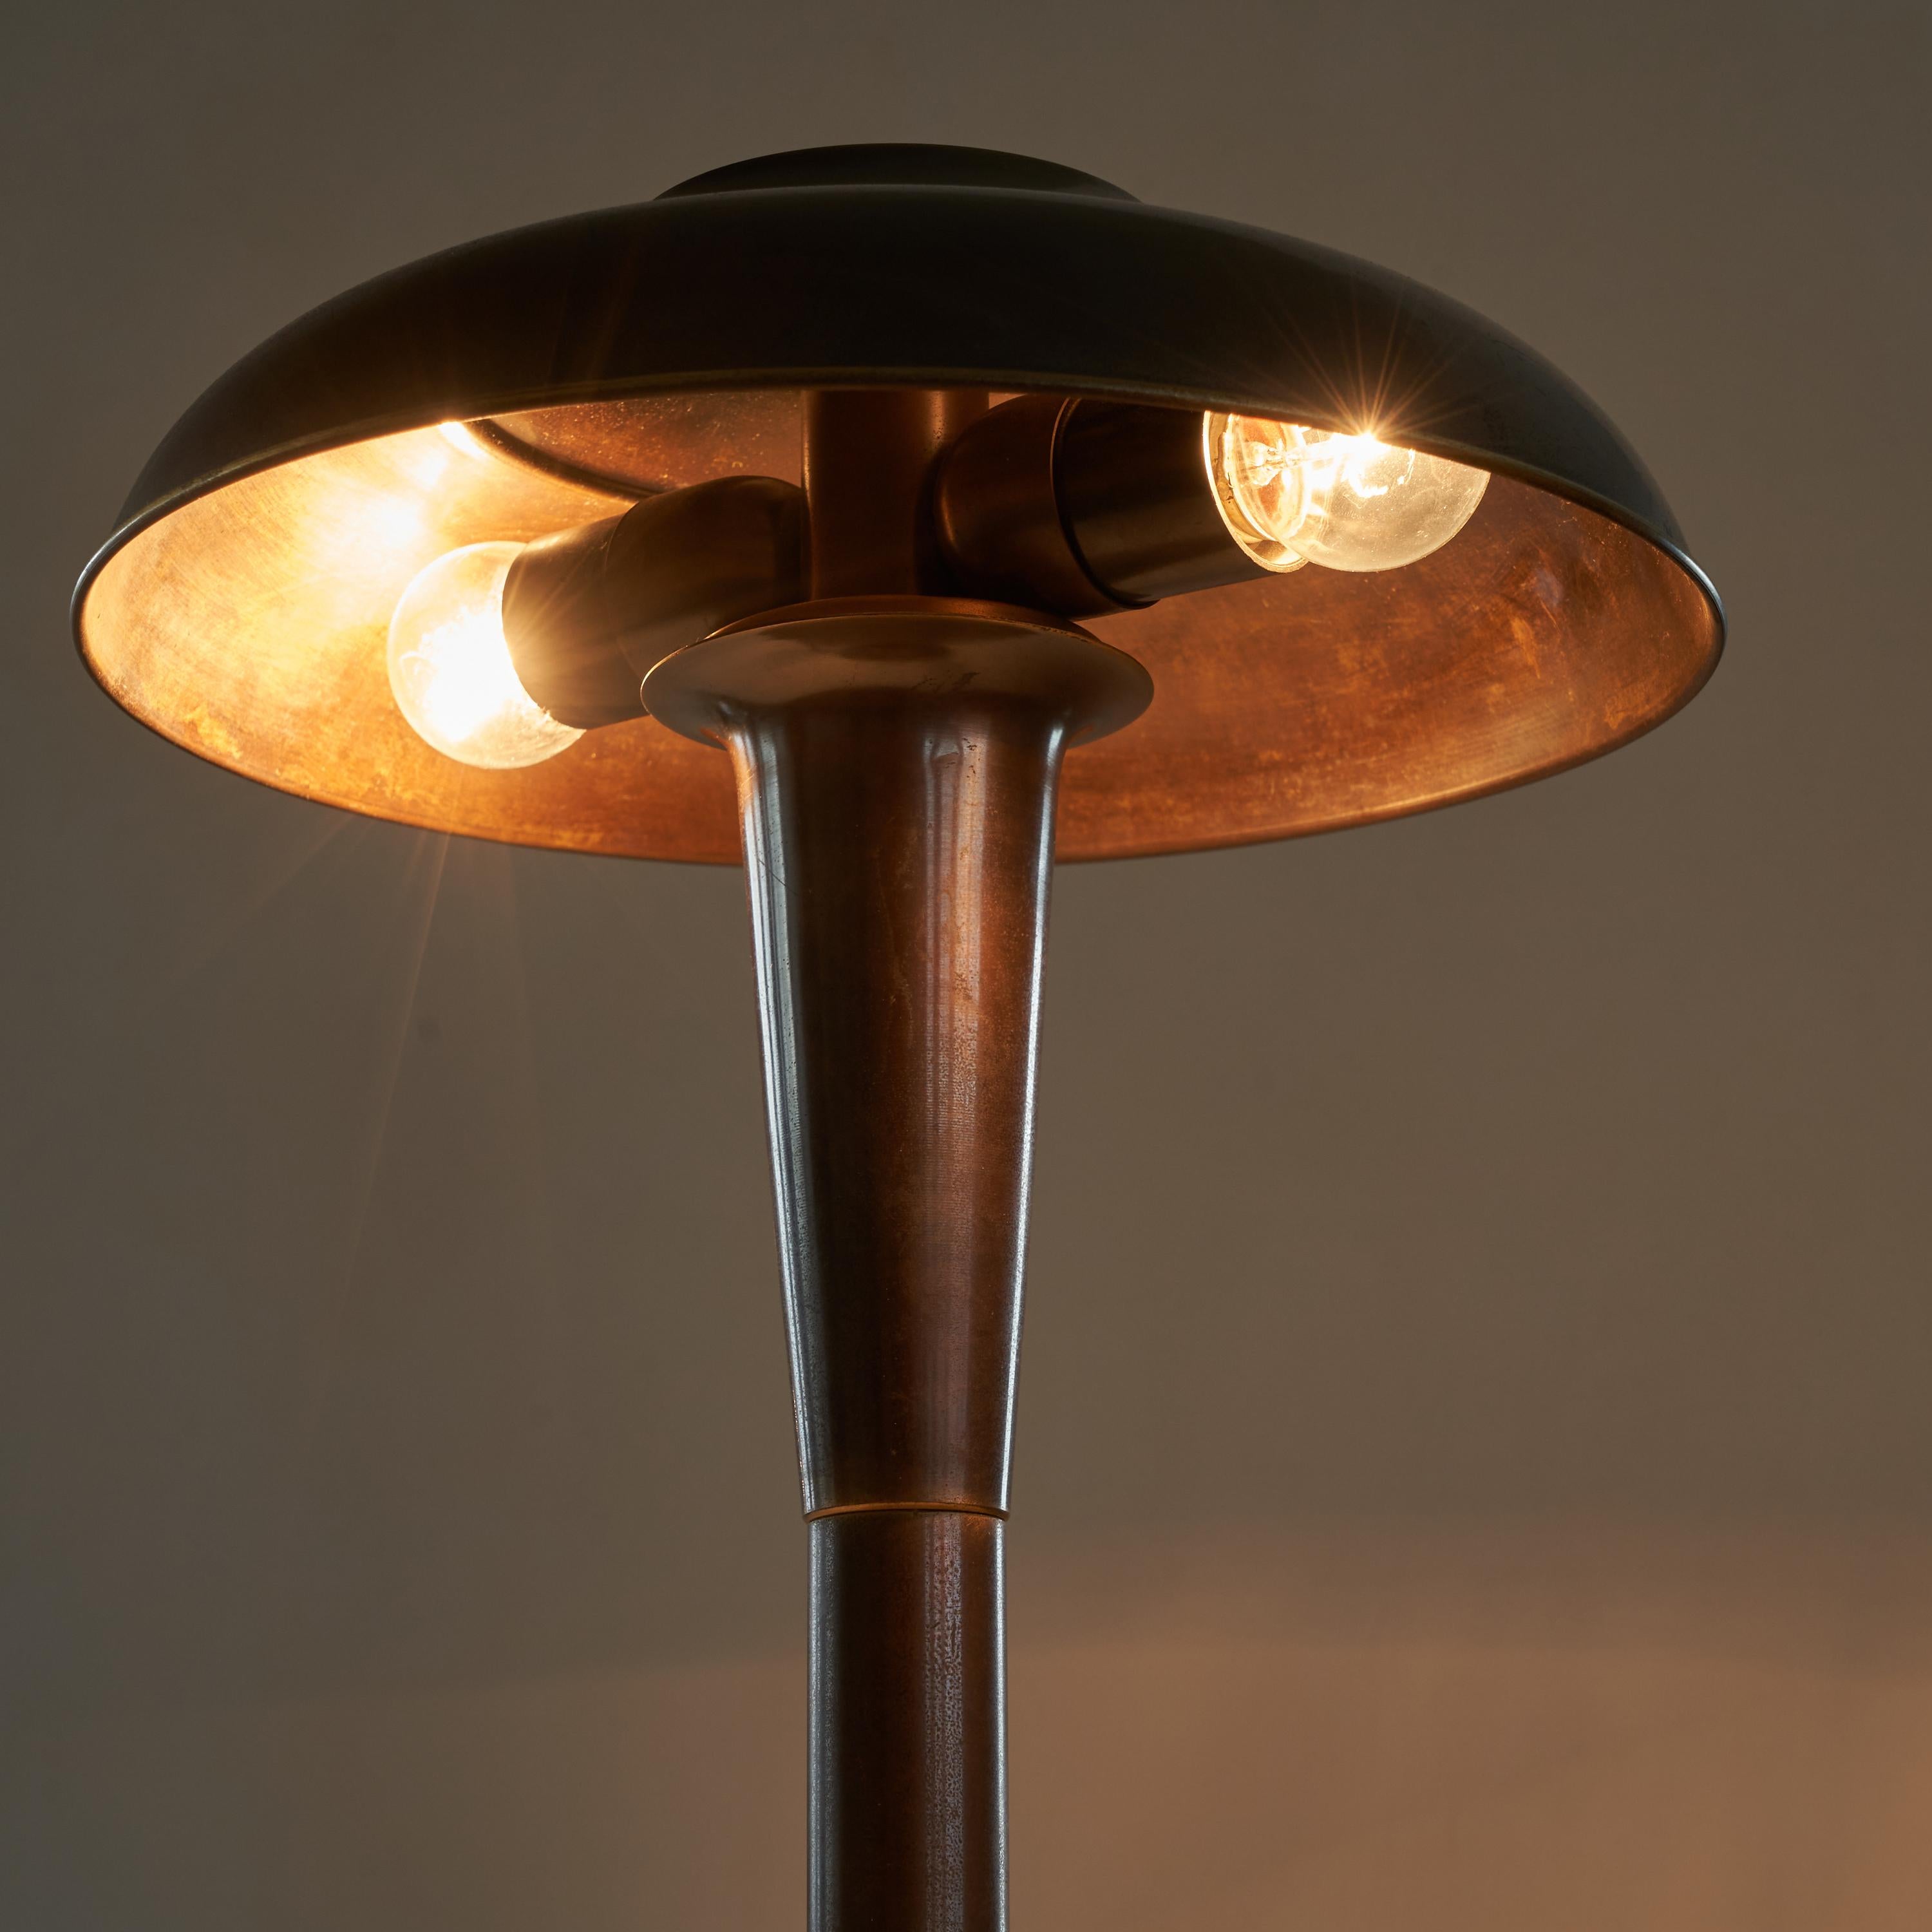 Art Deco Table Lamp in Patinated Brass 1950s For Sale 4